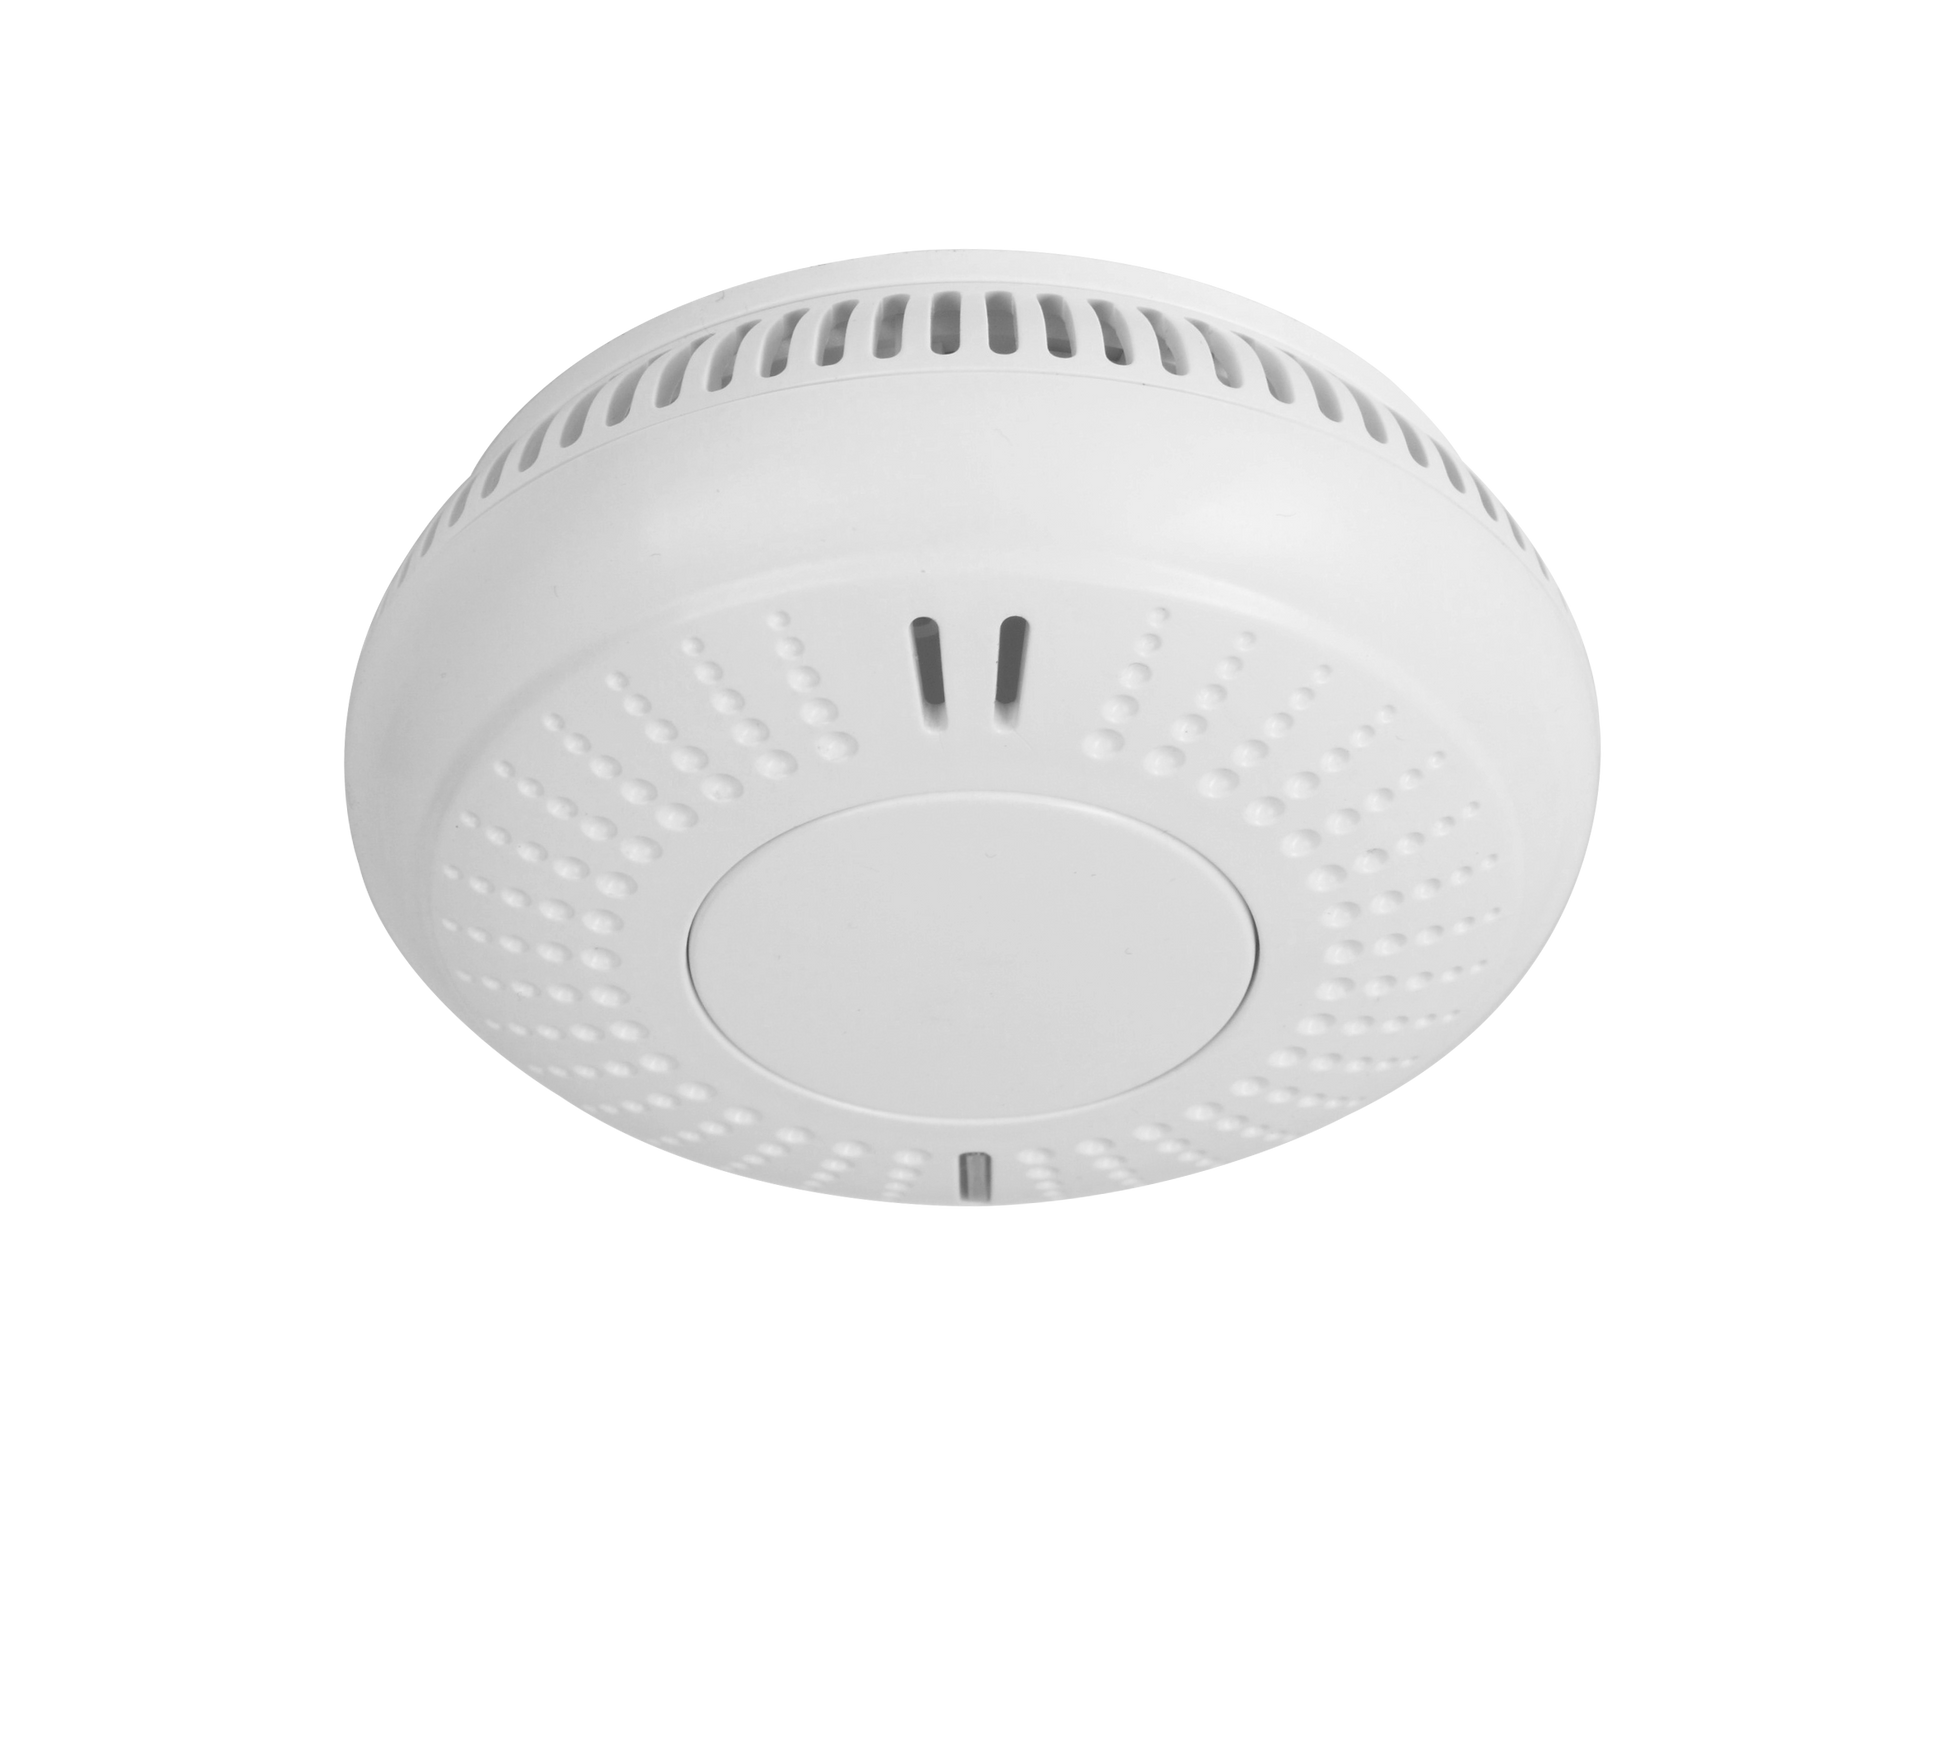 Smoke Alarm as seen on the ceiling